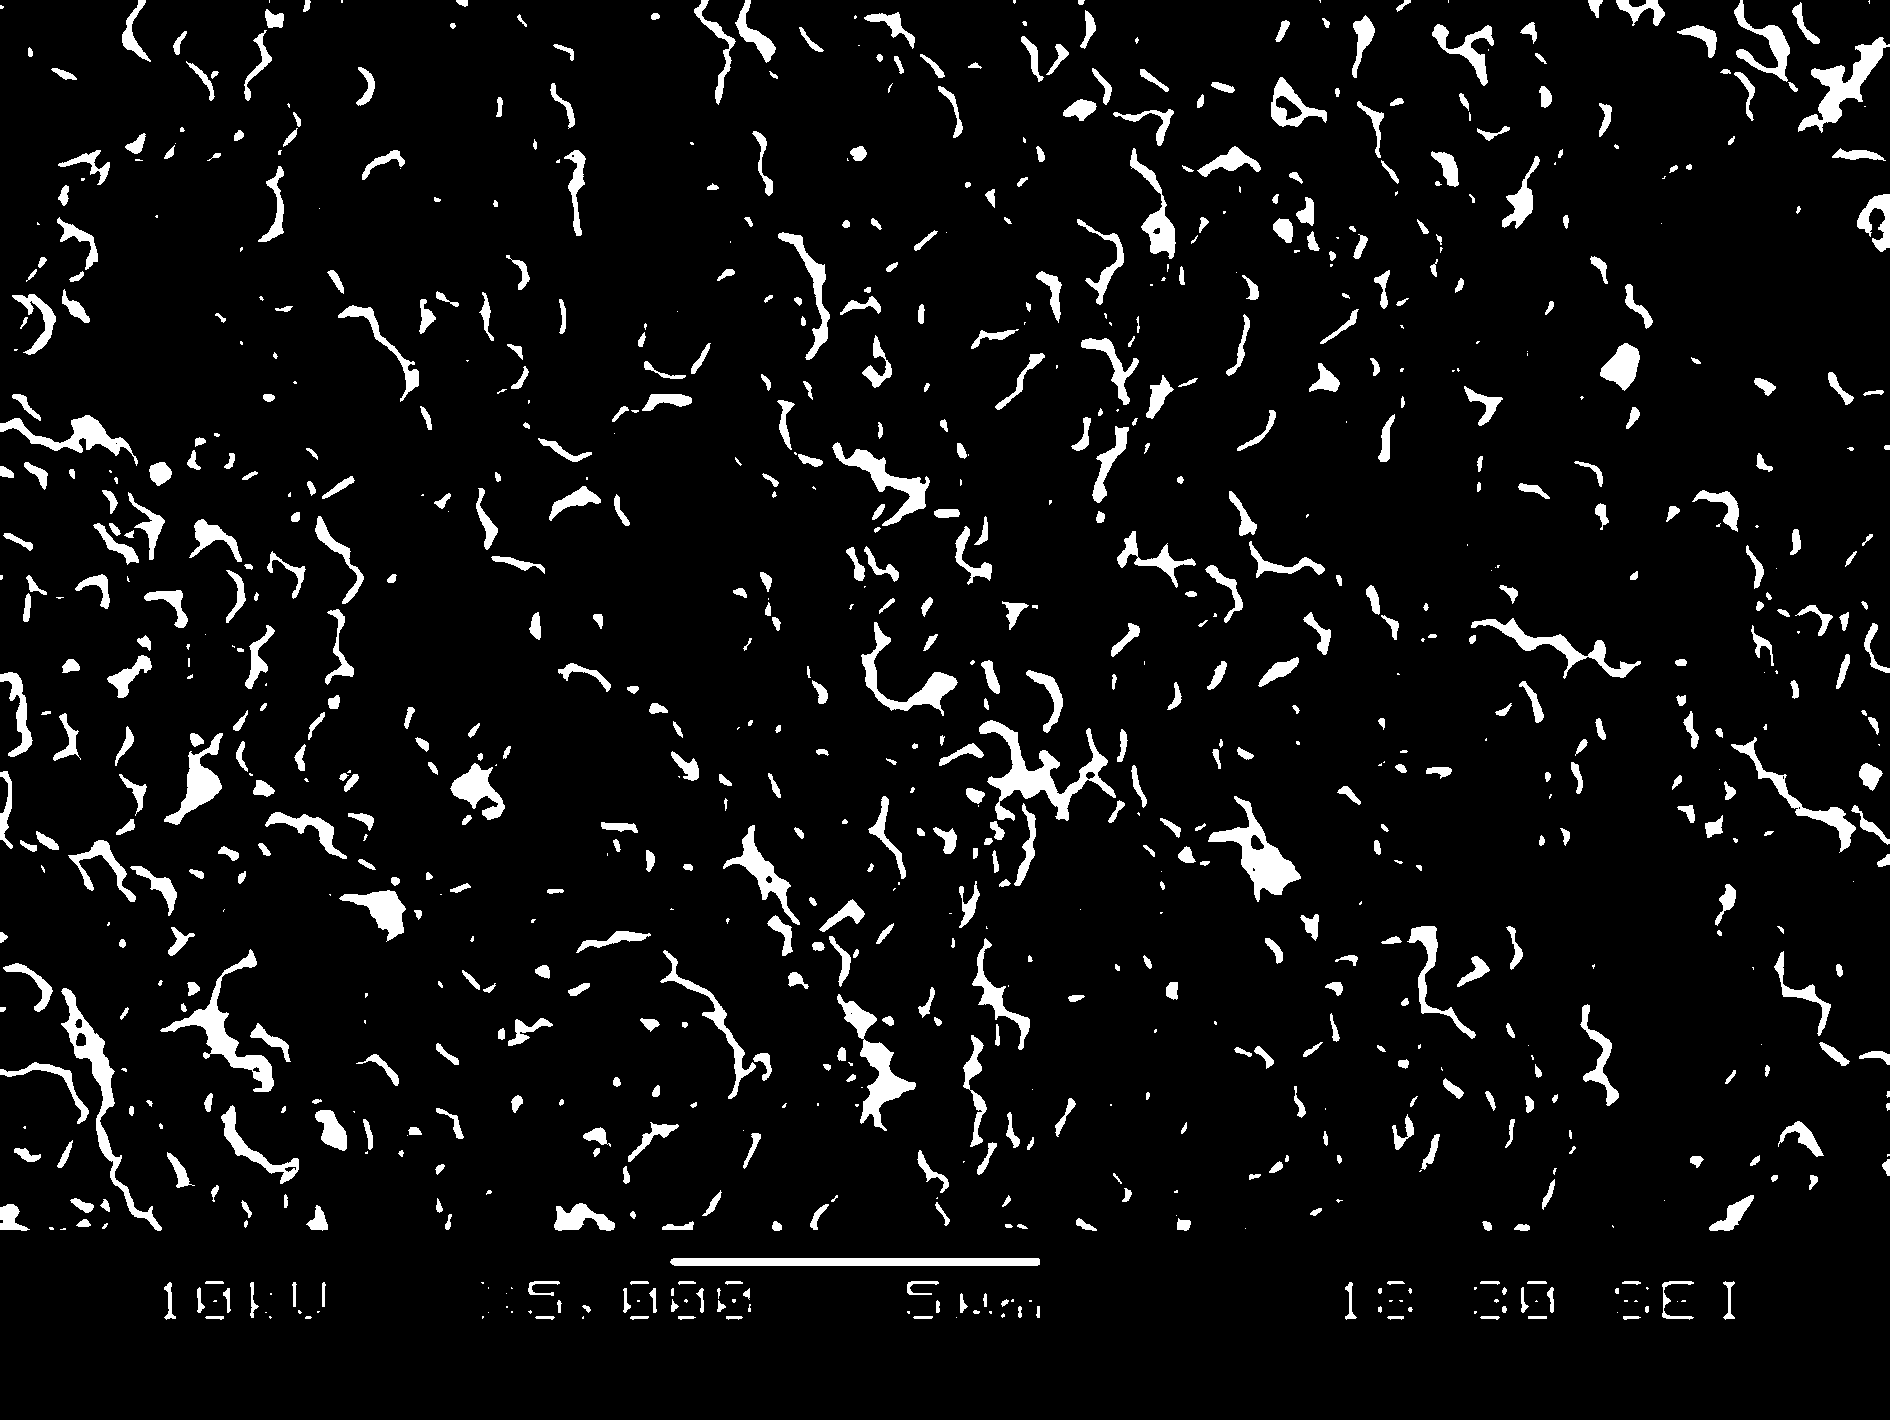 Microspheres prepared from composition containing zirconium oxide and preparation method of microspheres